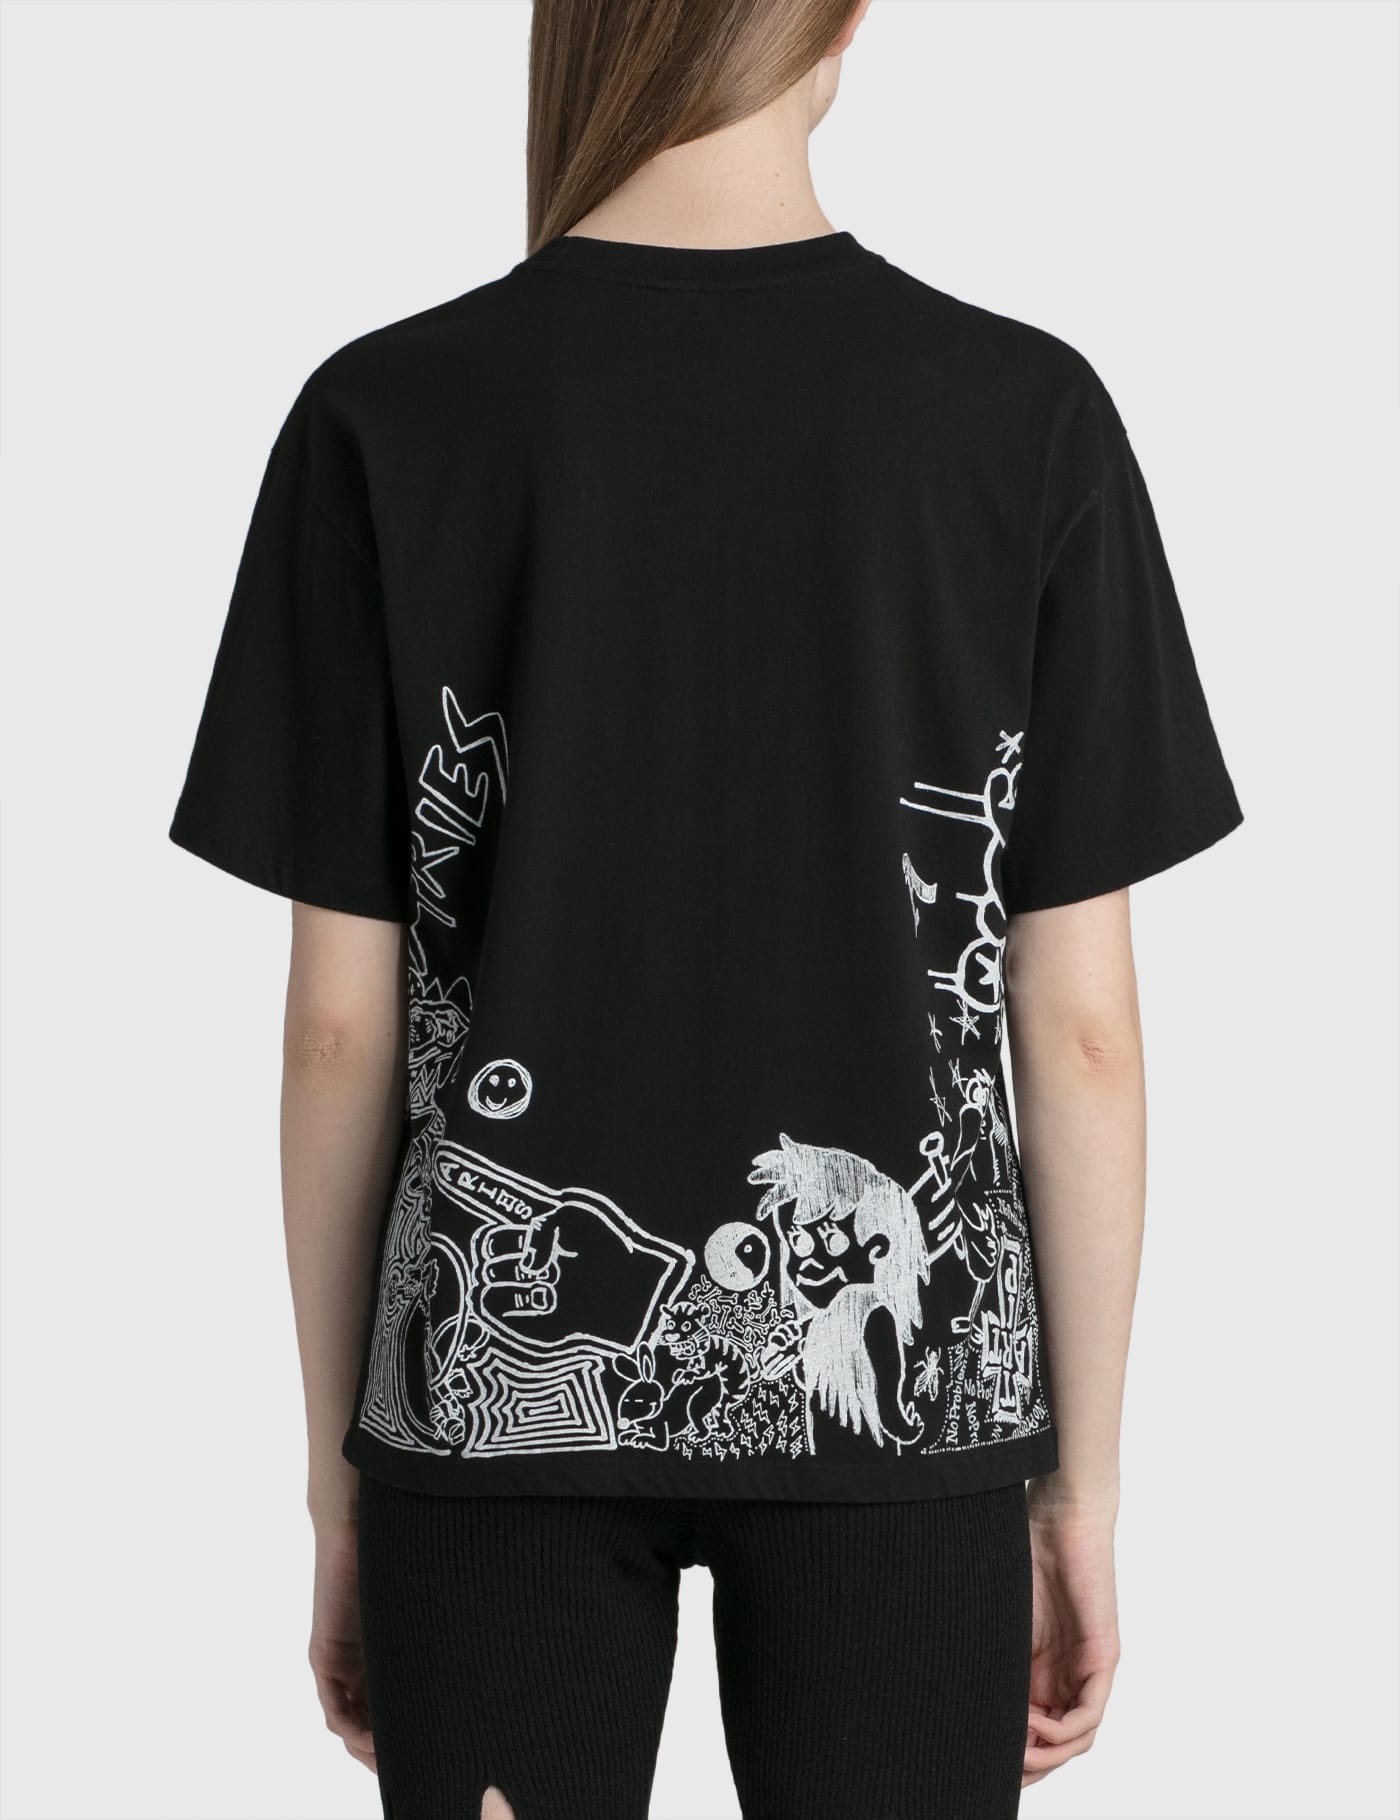 Aries - Doodle T-shirt | HBX - Globally Curated Fashion and 